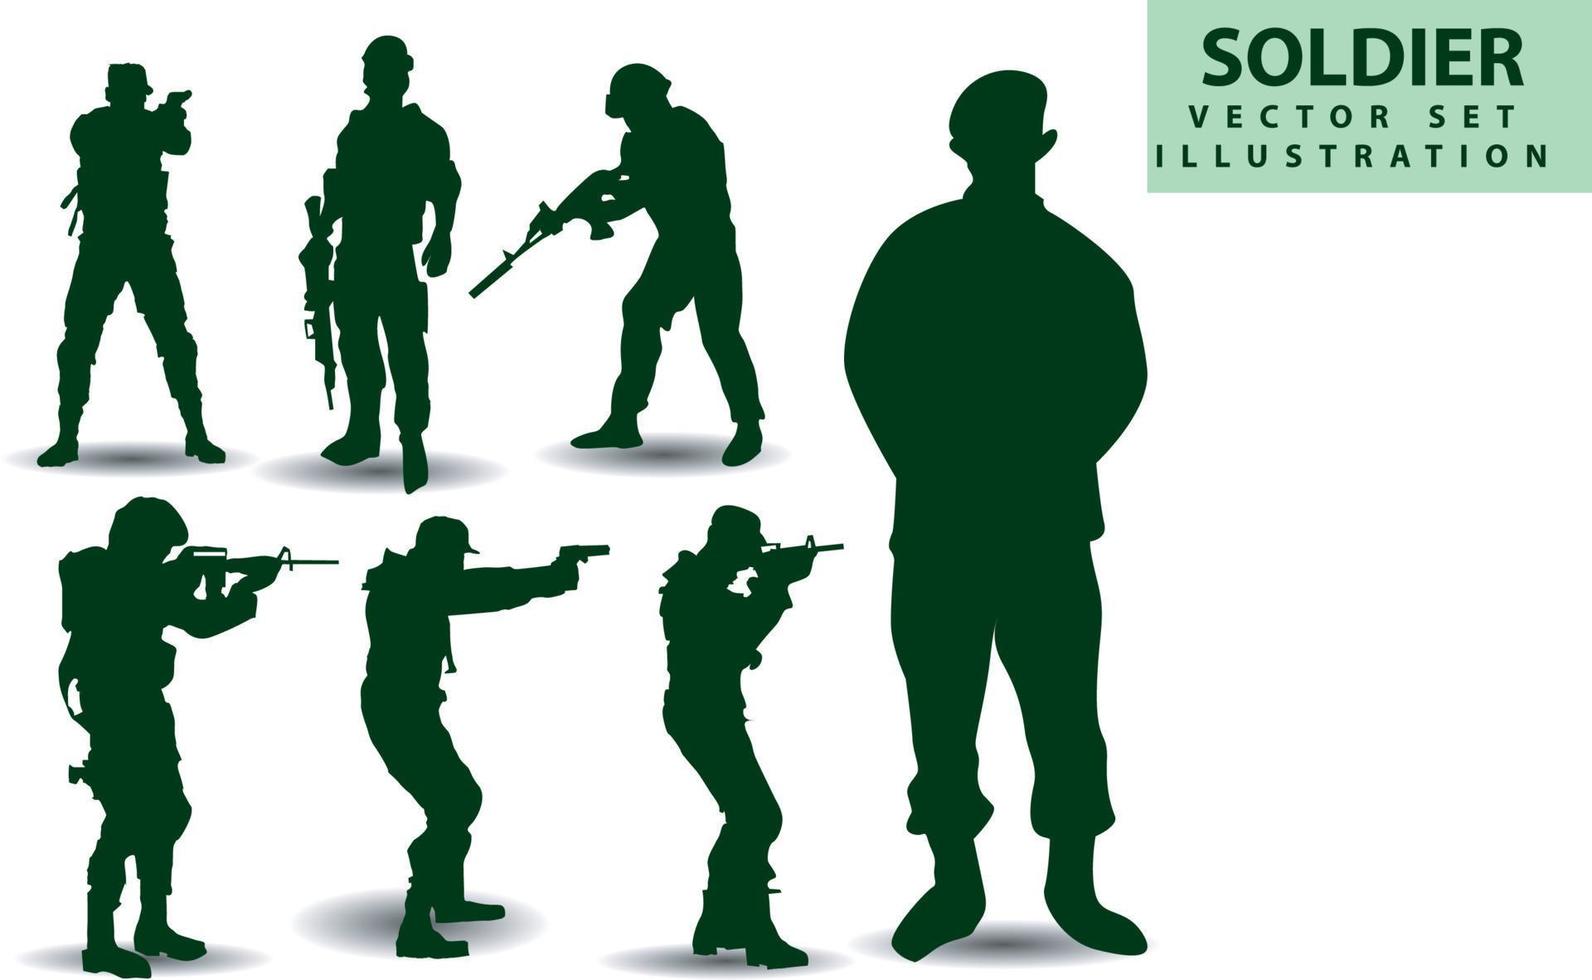 vector silhouettes of soldiers,Police, cowboy, group 1 team various styles holding weapons, preparing for battle, fight, style, green clothes isolated on white background